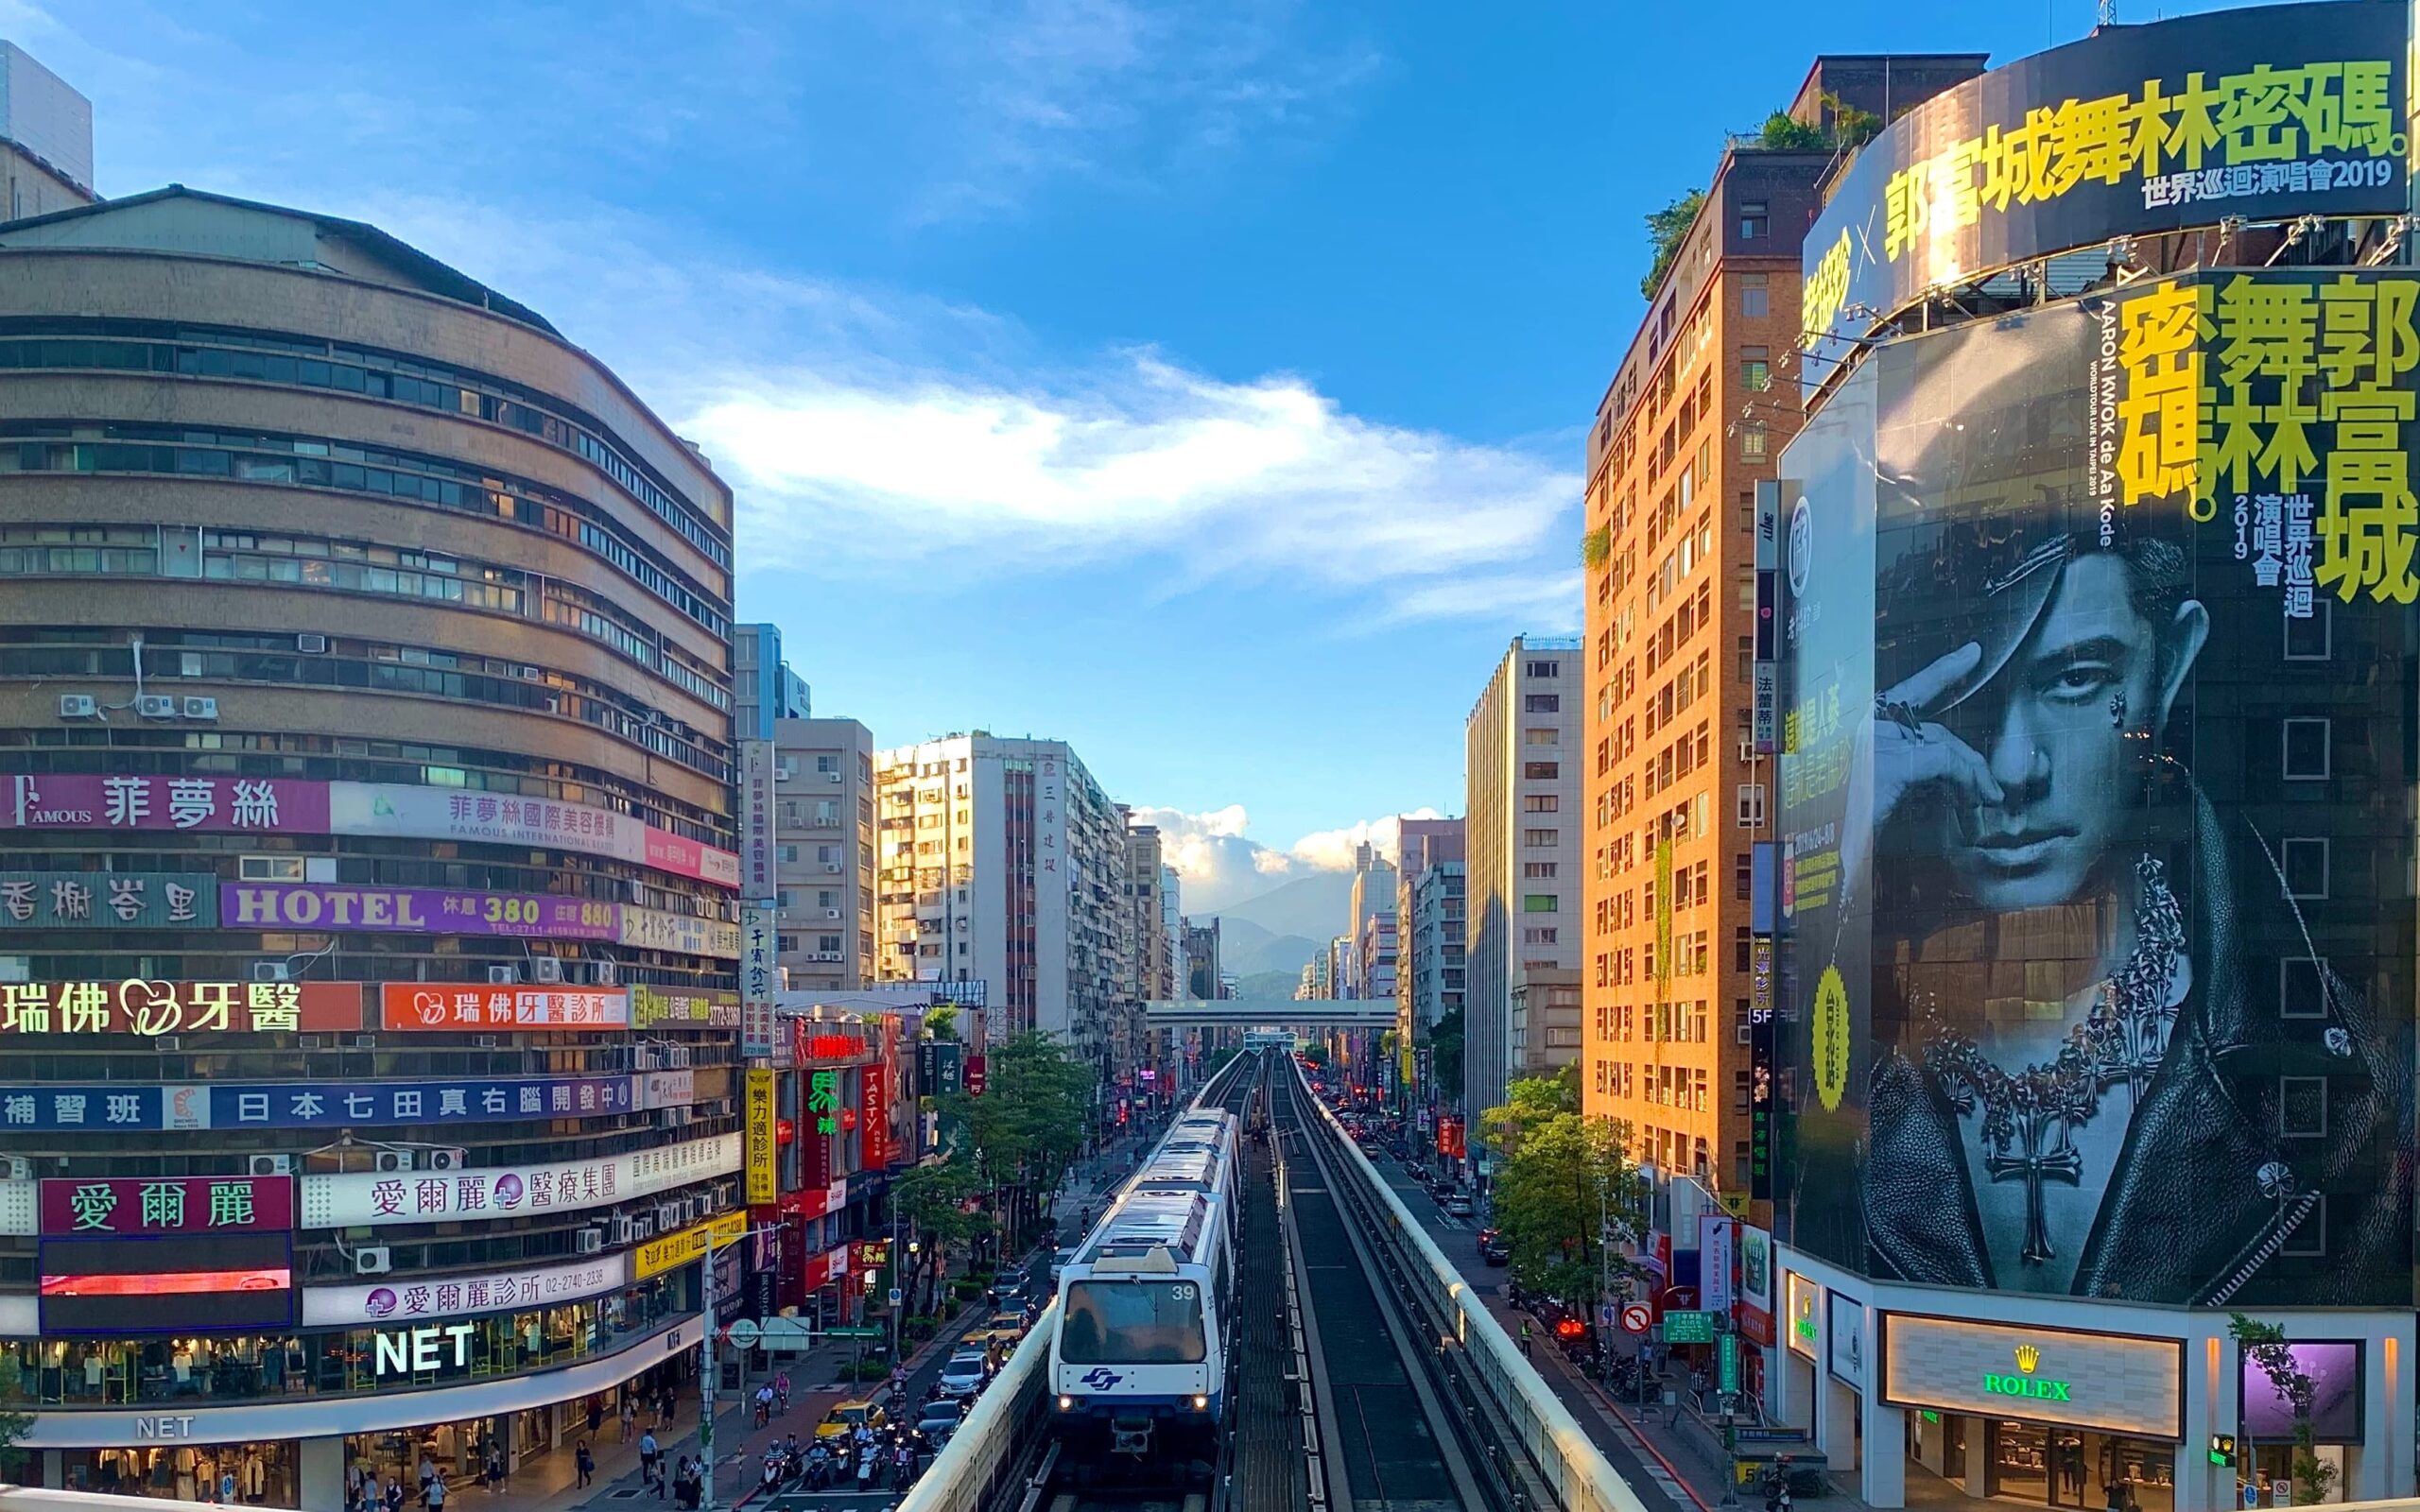 The elevated metro line in Taipei